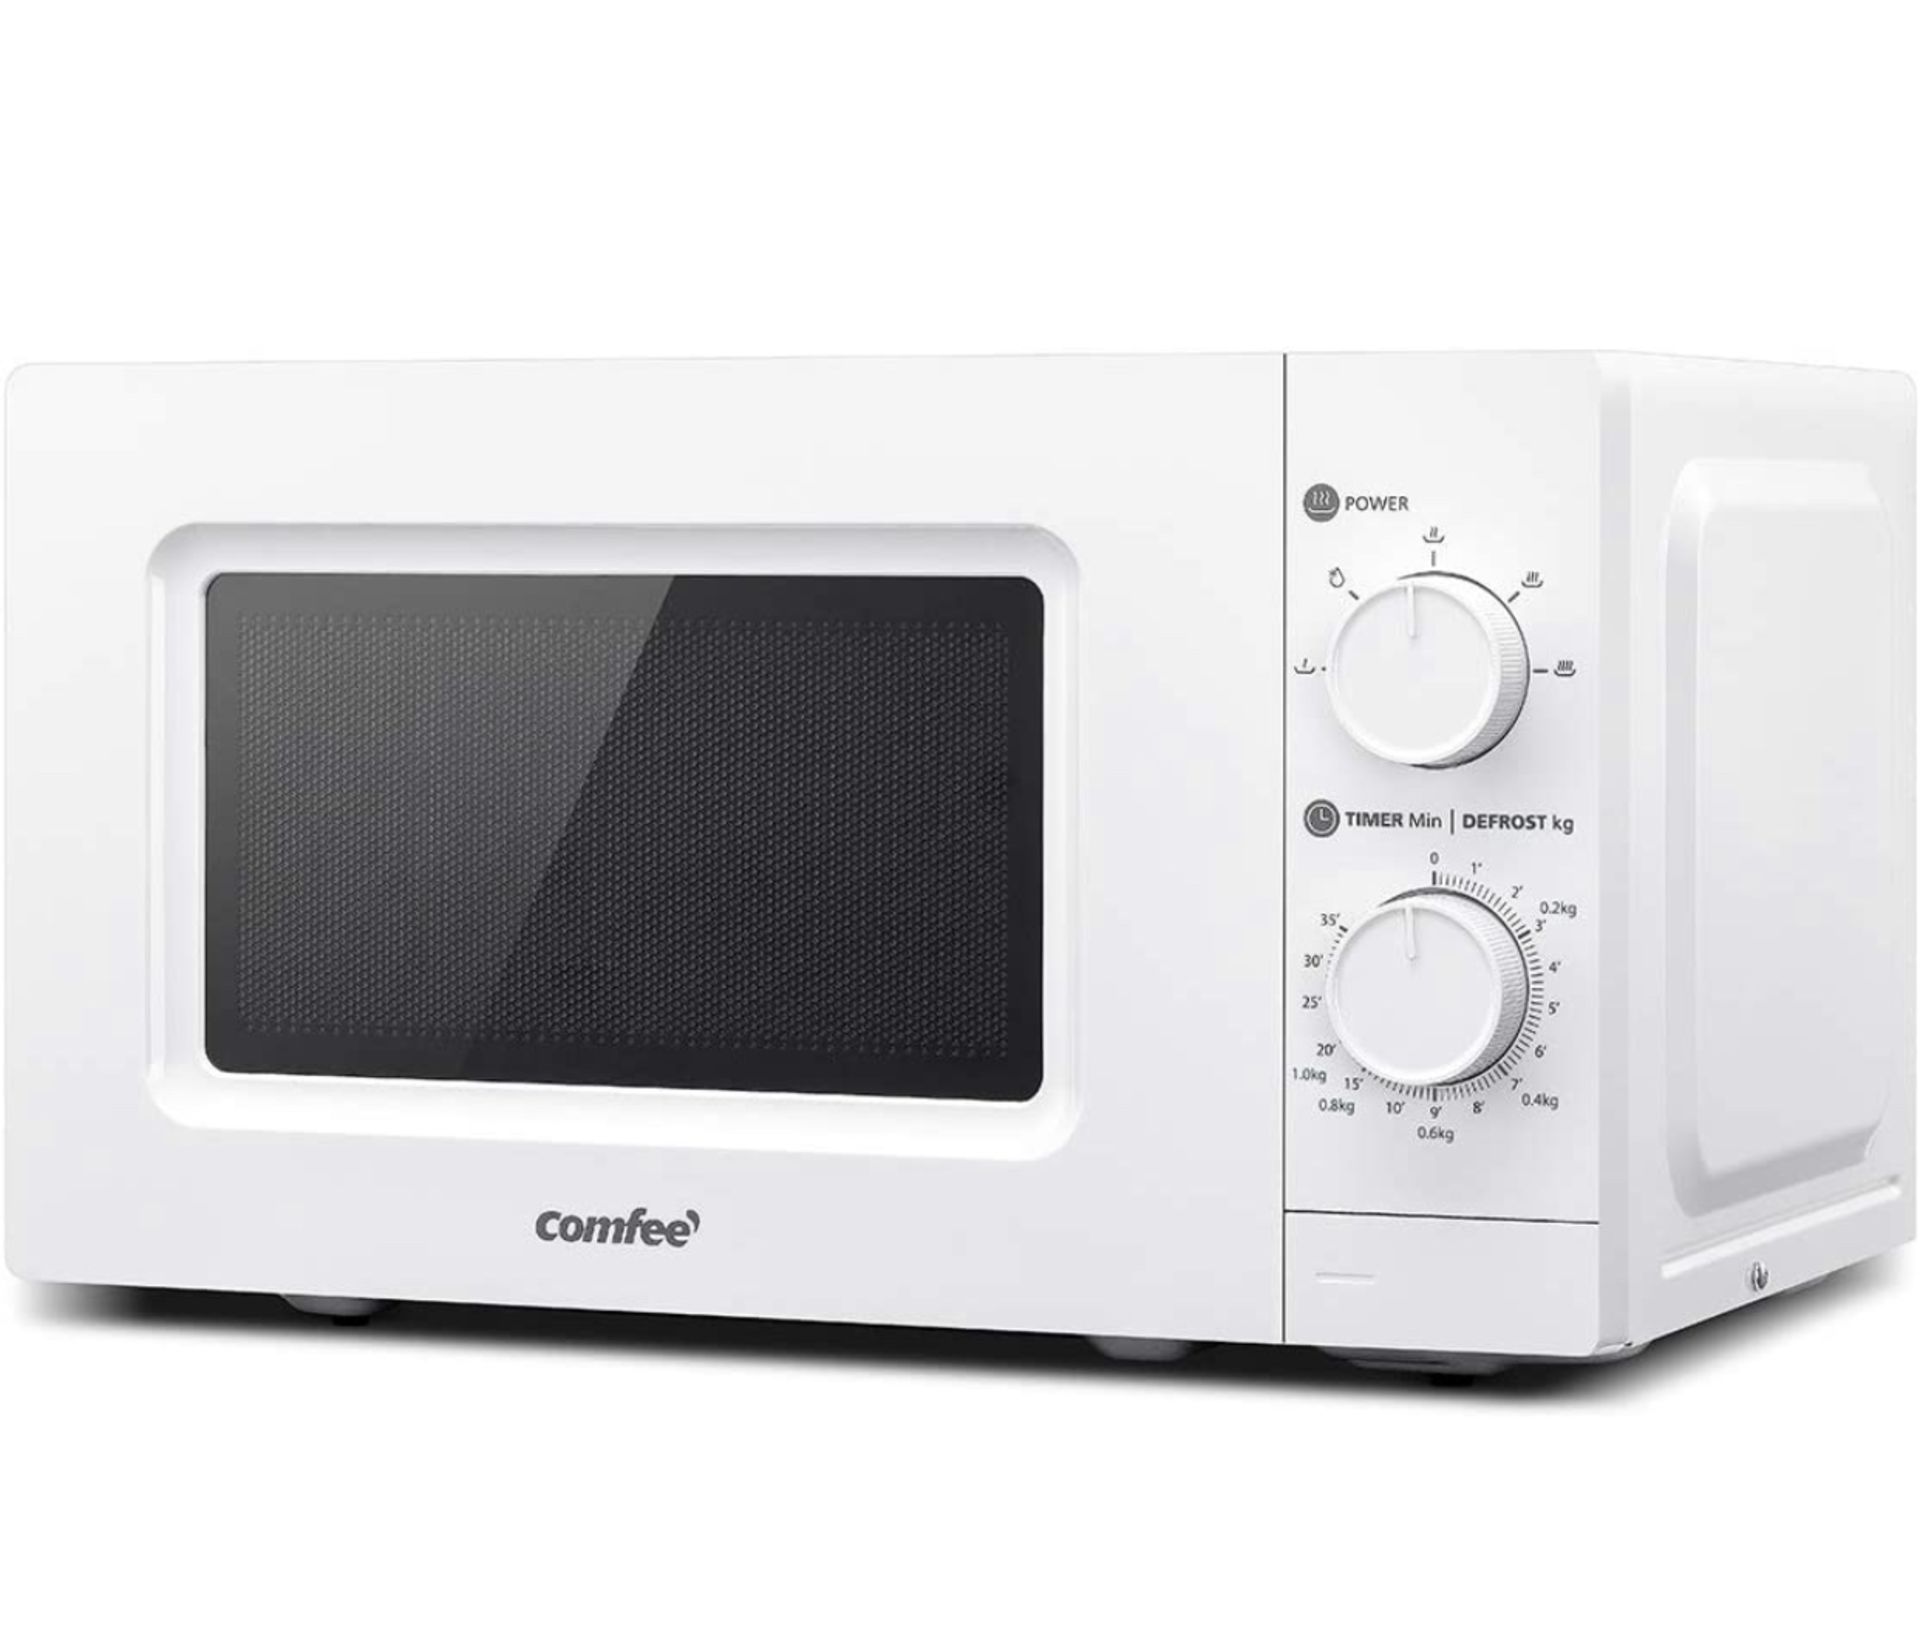 Comfee' 700W 20L Microwave Oven (dented, see image) RRP £60.99